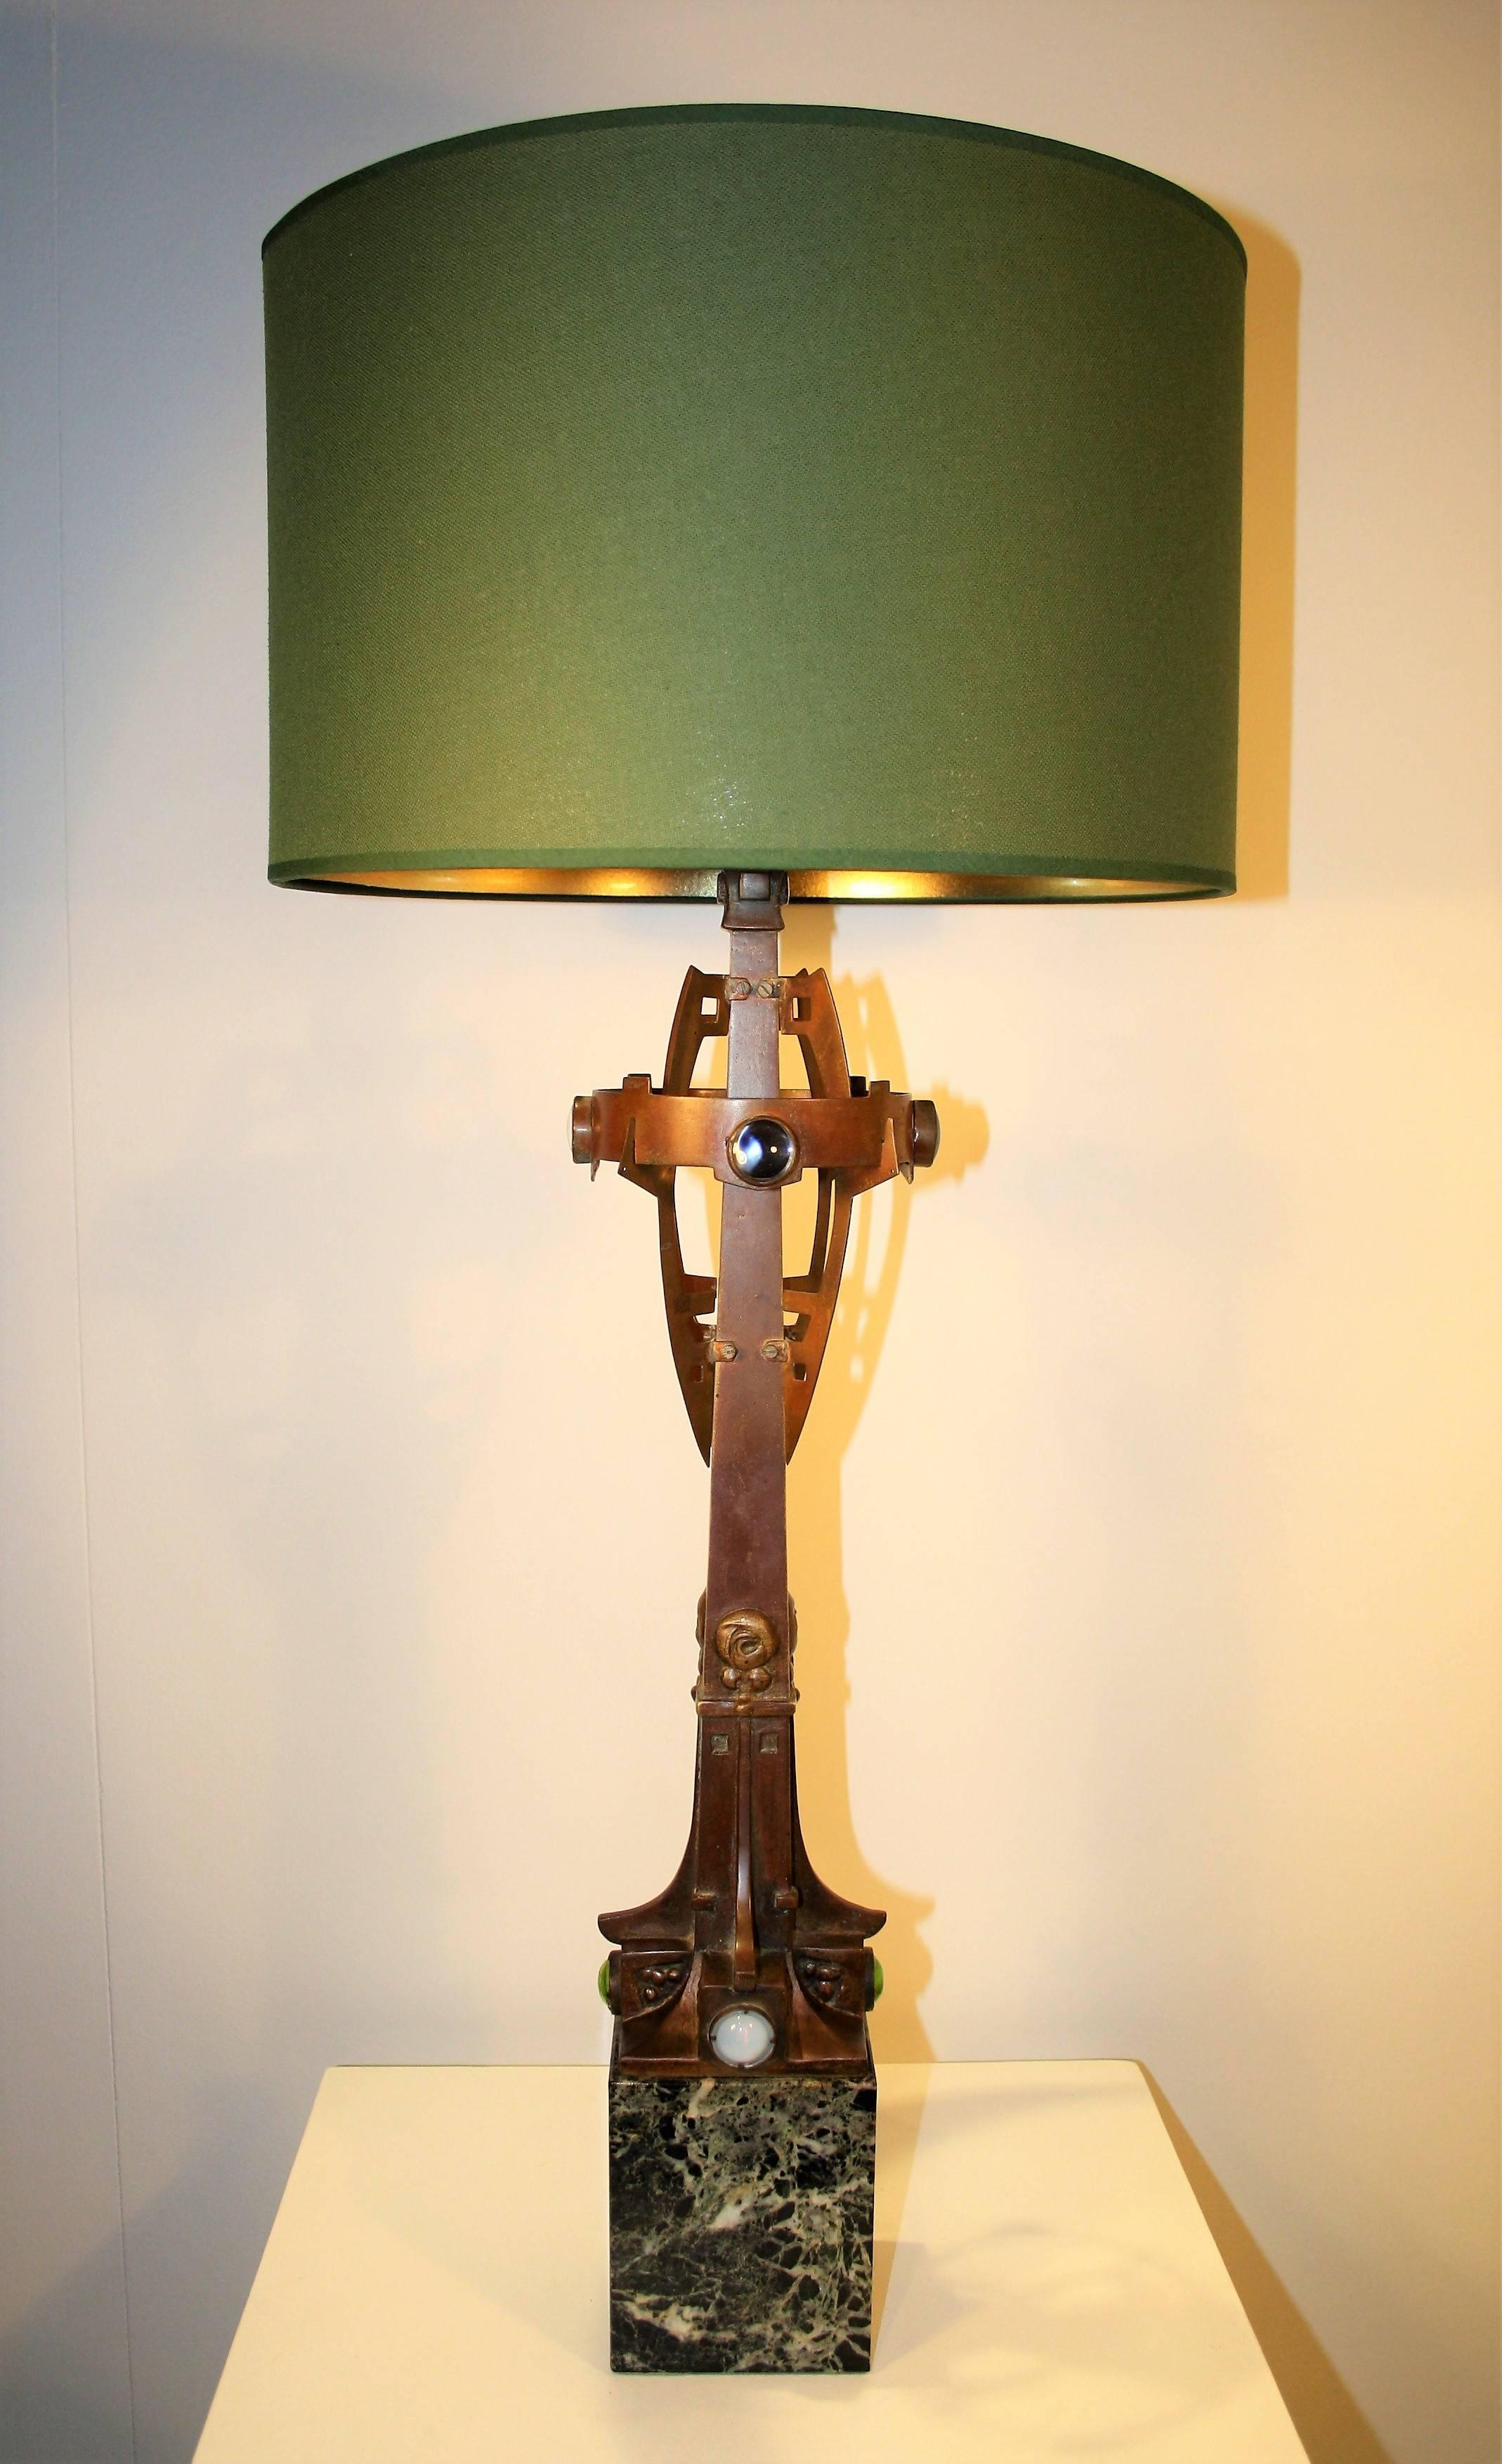 A very rare bronze table lamp or desk lamp from the Architect Paul Hamesse (1877-1956) made for the Ameke Shop in Brussels.
Paul Hamesse is part of the Architect group 